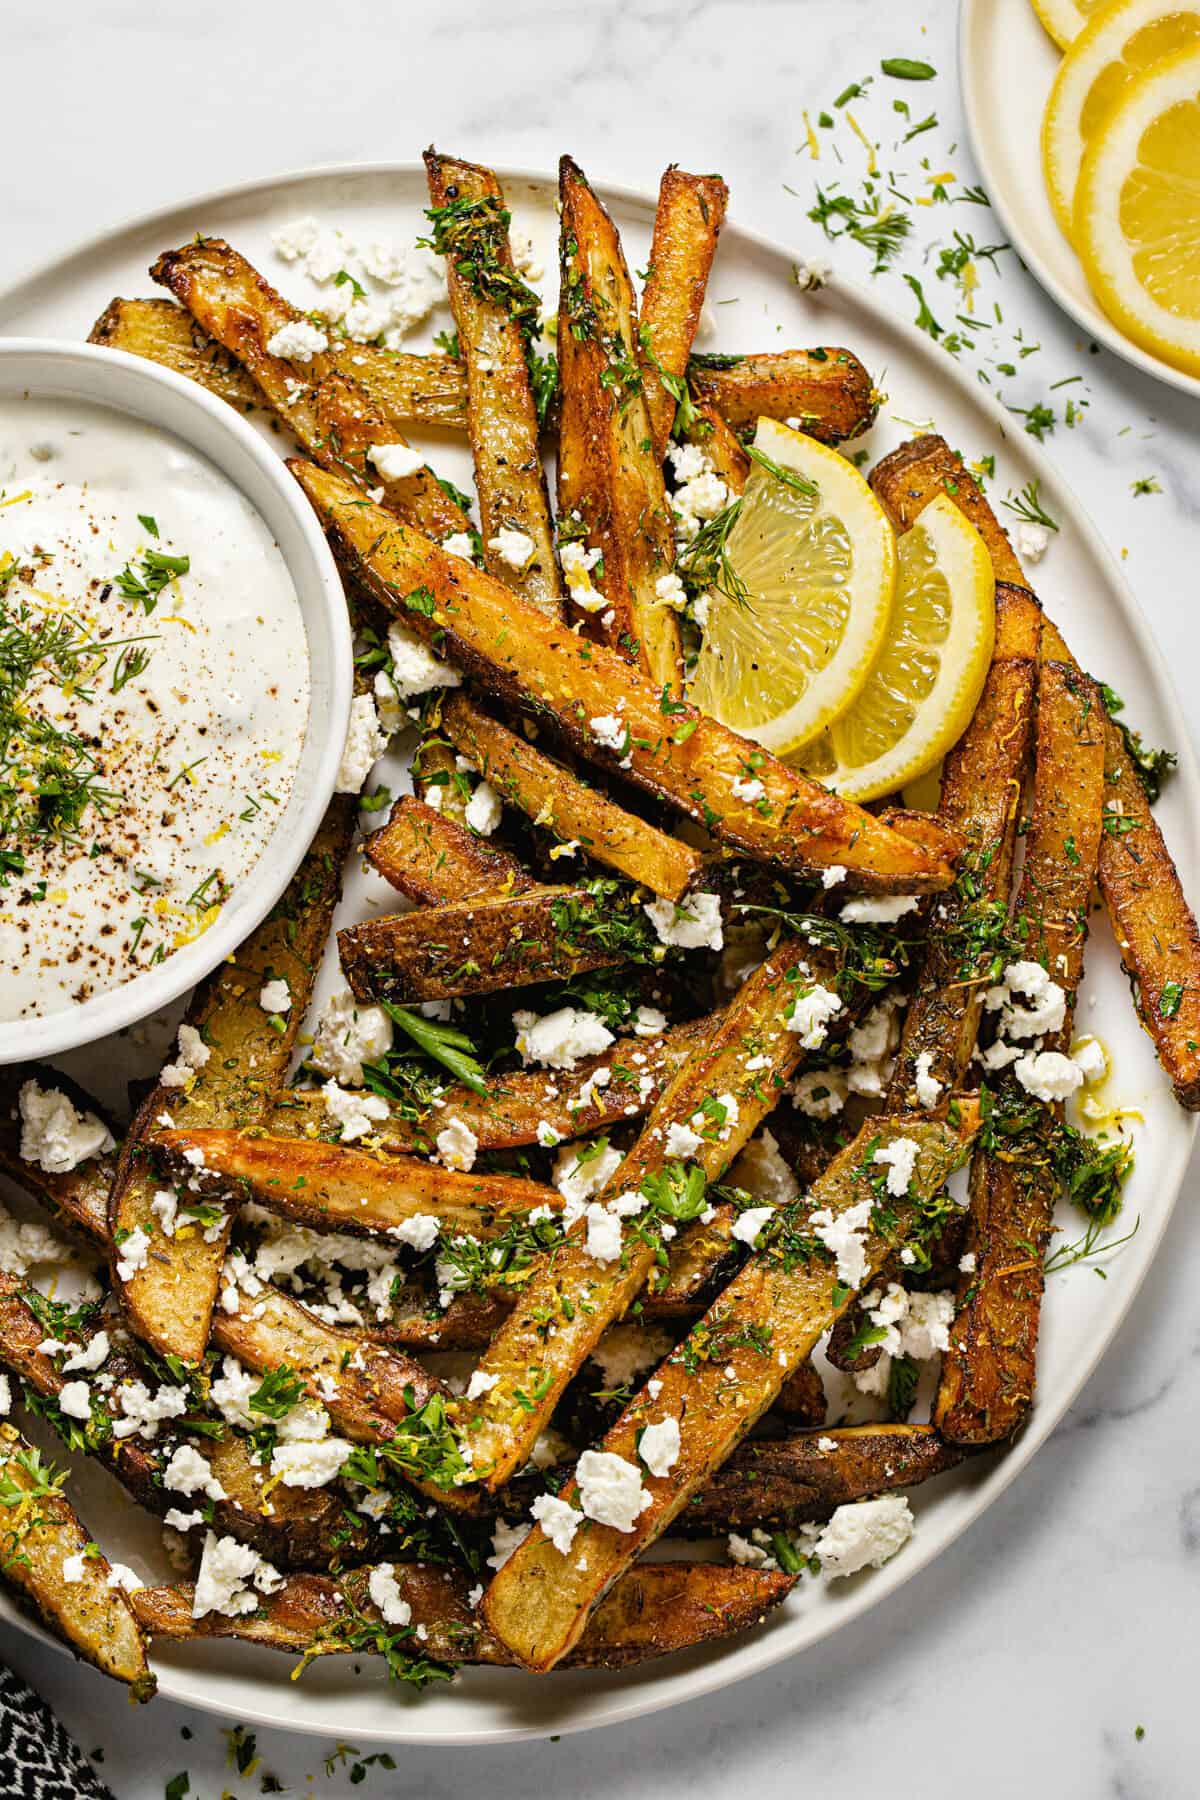 Large white plate filled with homemade Greek fries and a bowl of dill yogurt sauce